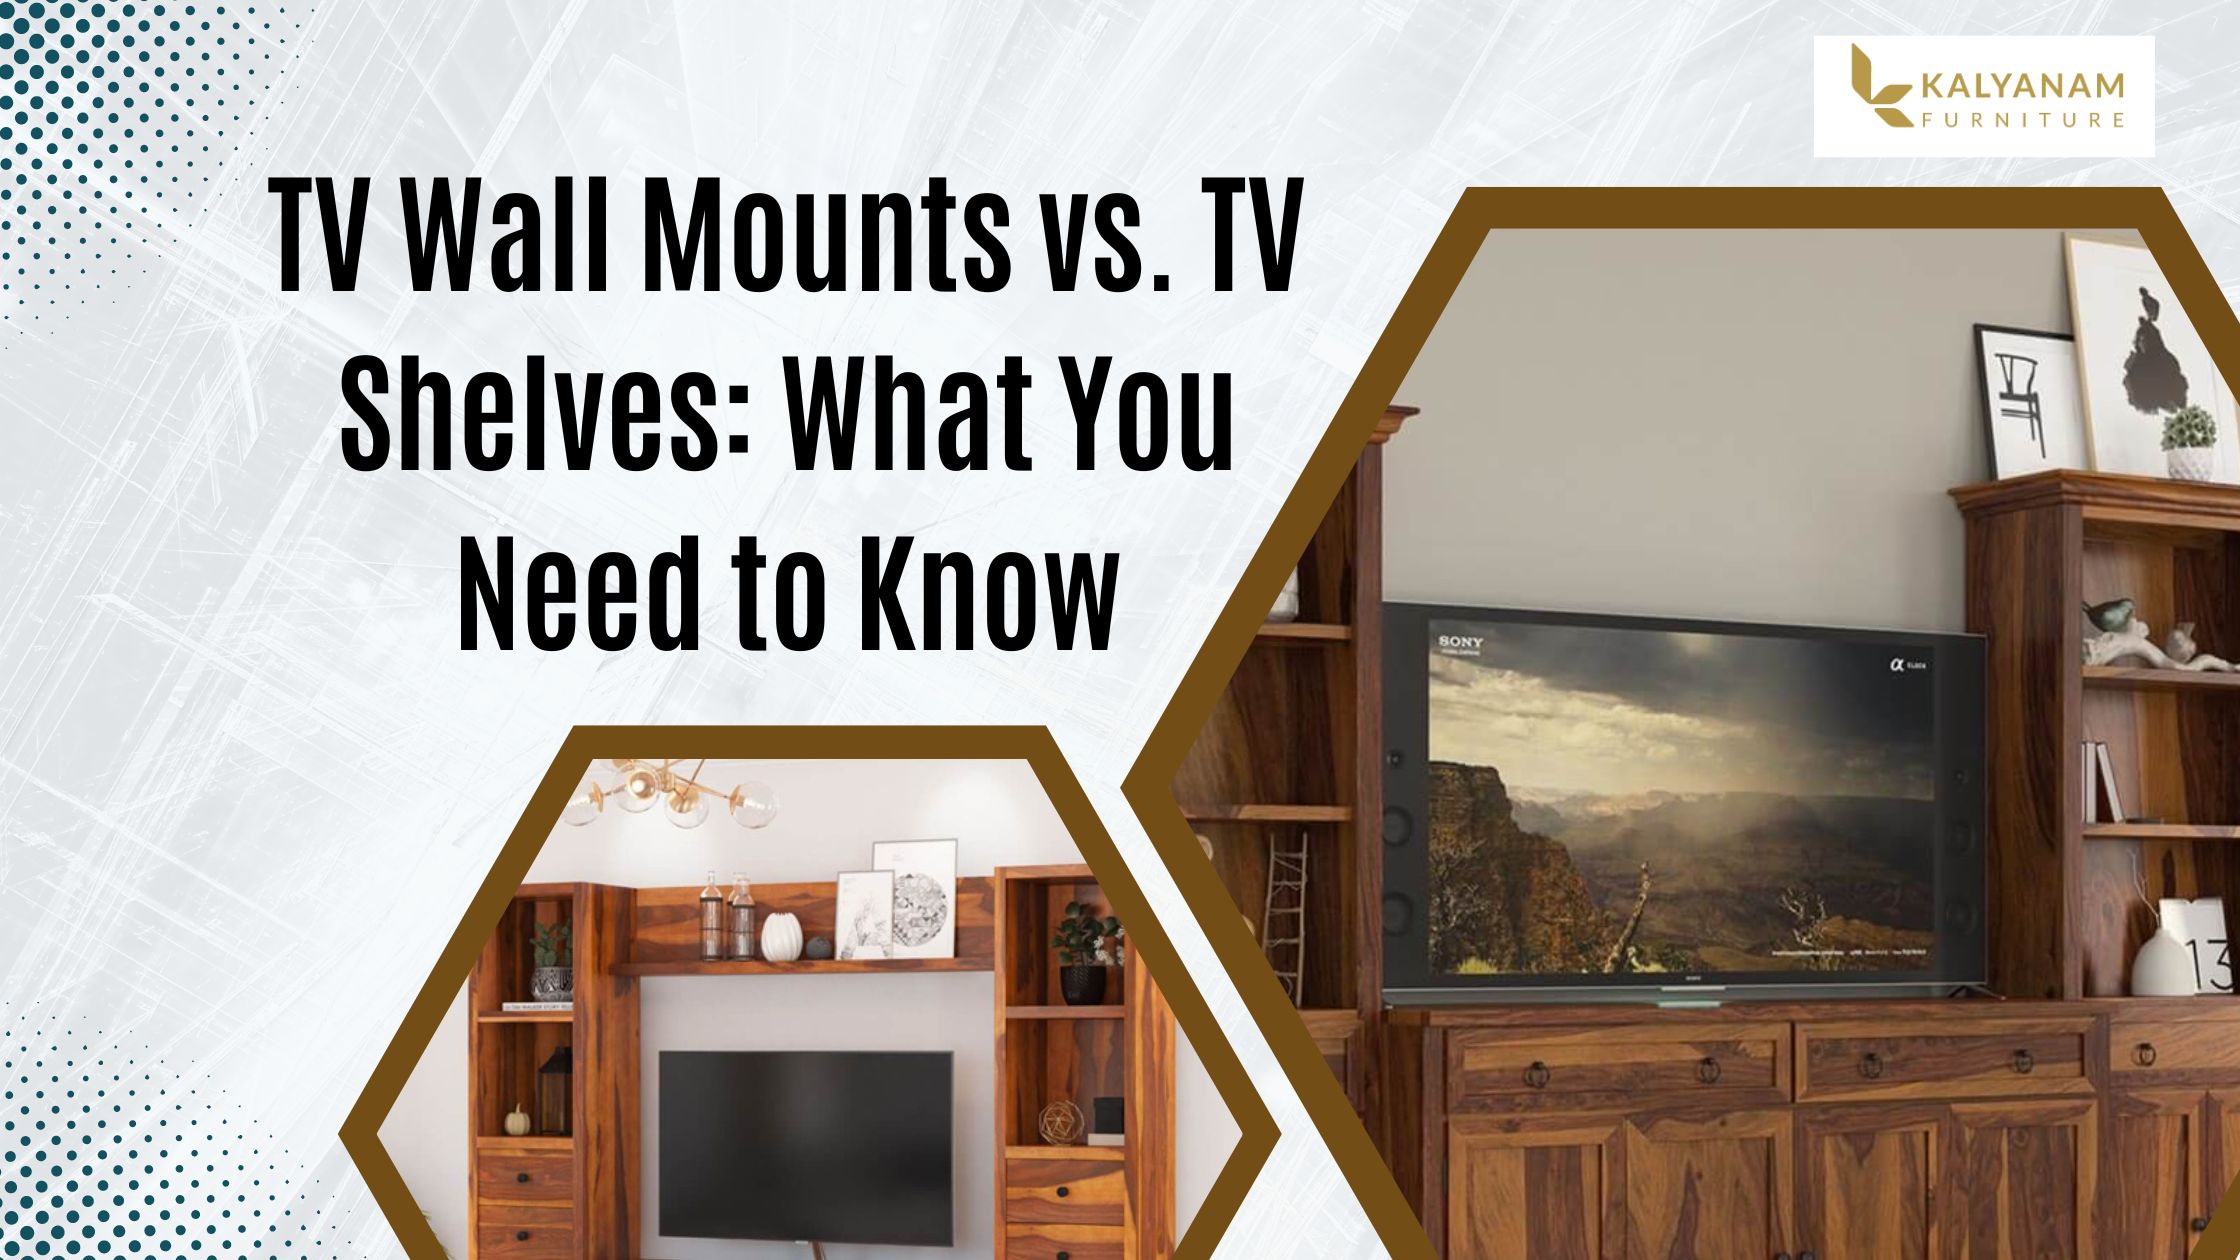 TV Wall Mounts vs. TV Shelves: What You Need to Know